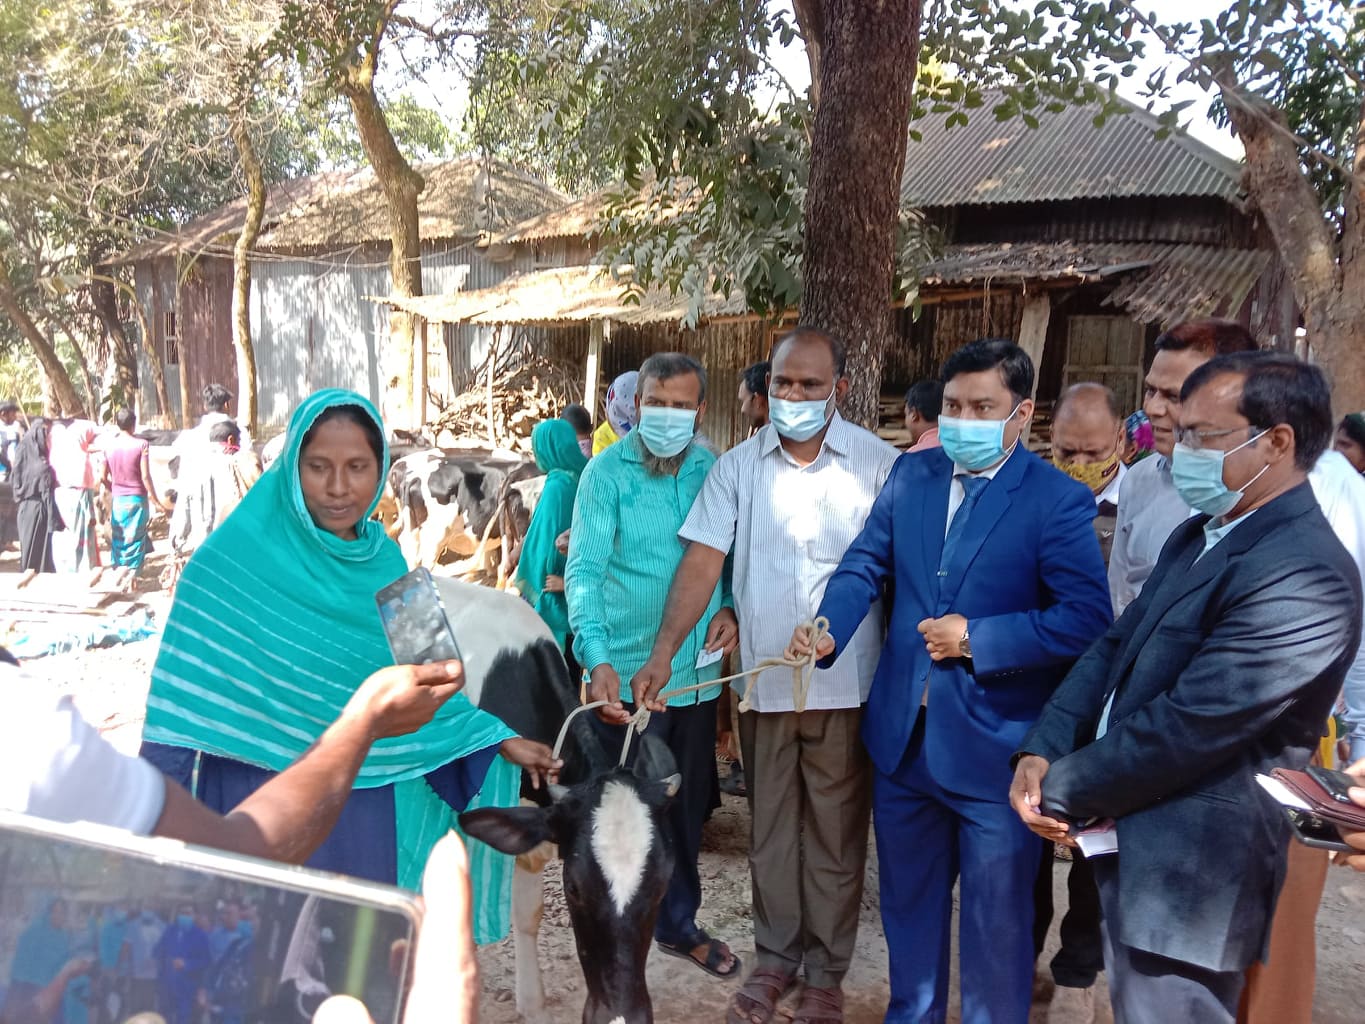 22 Milking Cow distributed towards the beneficiaries at Kaliakoir Upazilia, Gazipur on 2nd December 2021